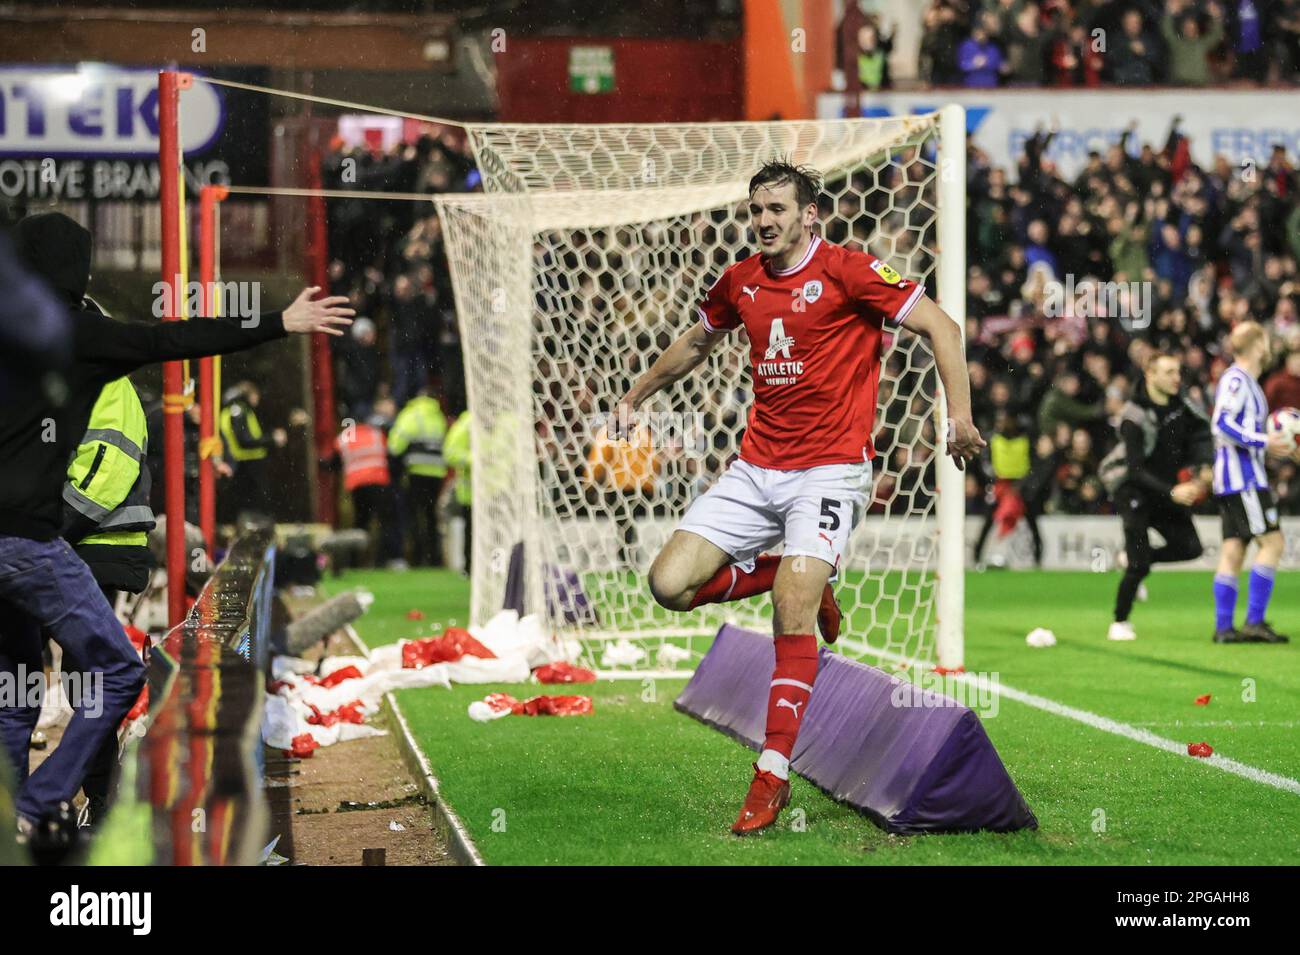 Liam Kitching #5 of Barnsley celebrates his goal to make it 4-2 during the Sky Bet League 1 match Barnsley vs Sheffield Wednesday at Oakwell, Barnsley, United Kingdom, 21st March 2023  (Photo by Mark Cosgrove/News Images) Stock Photo